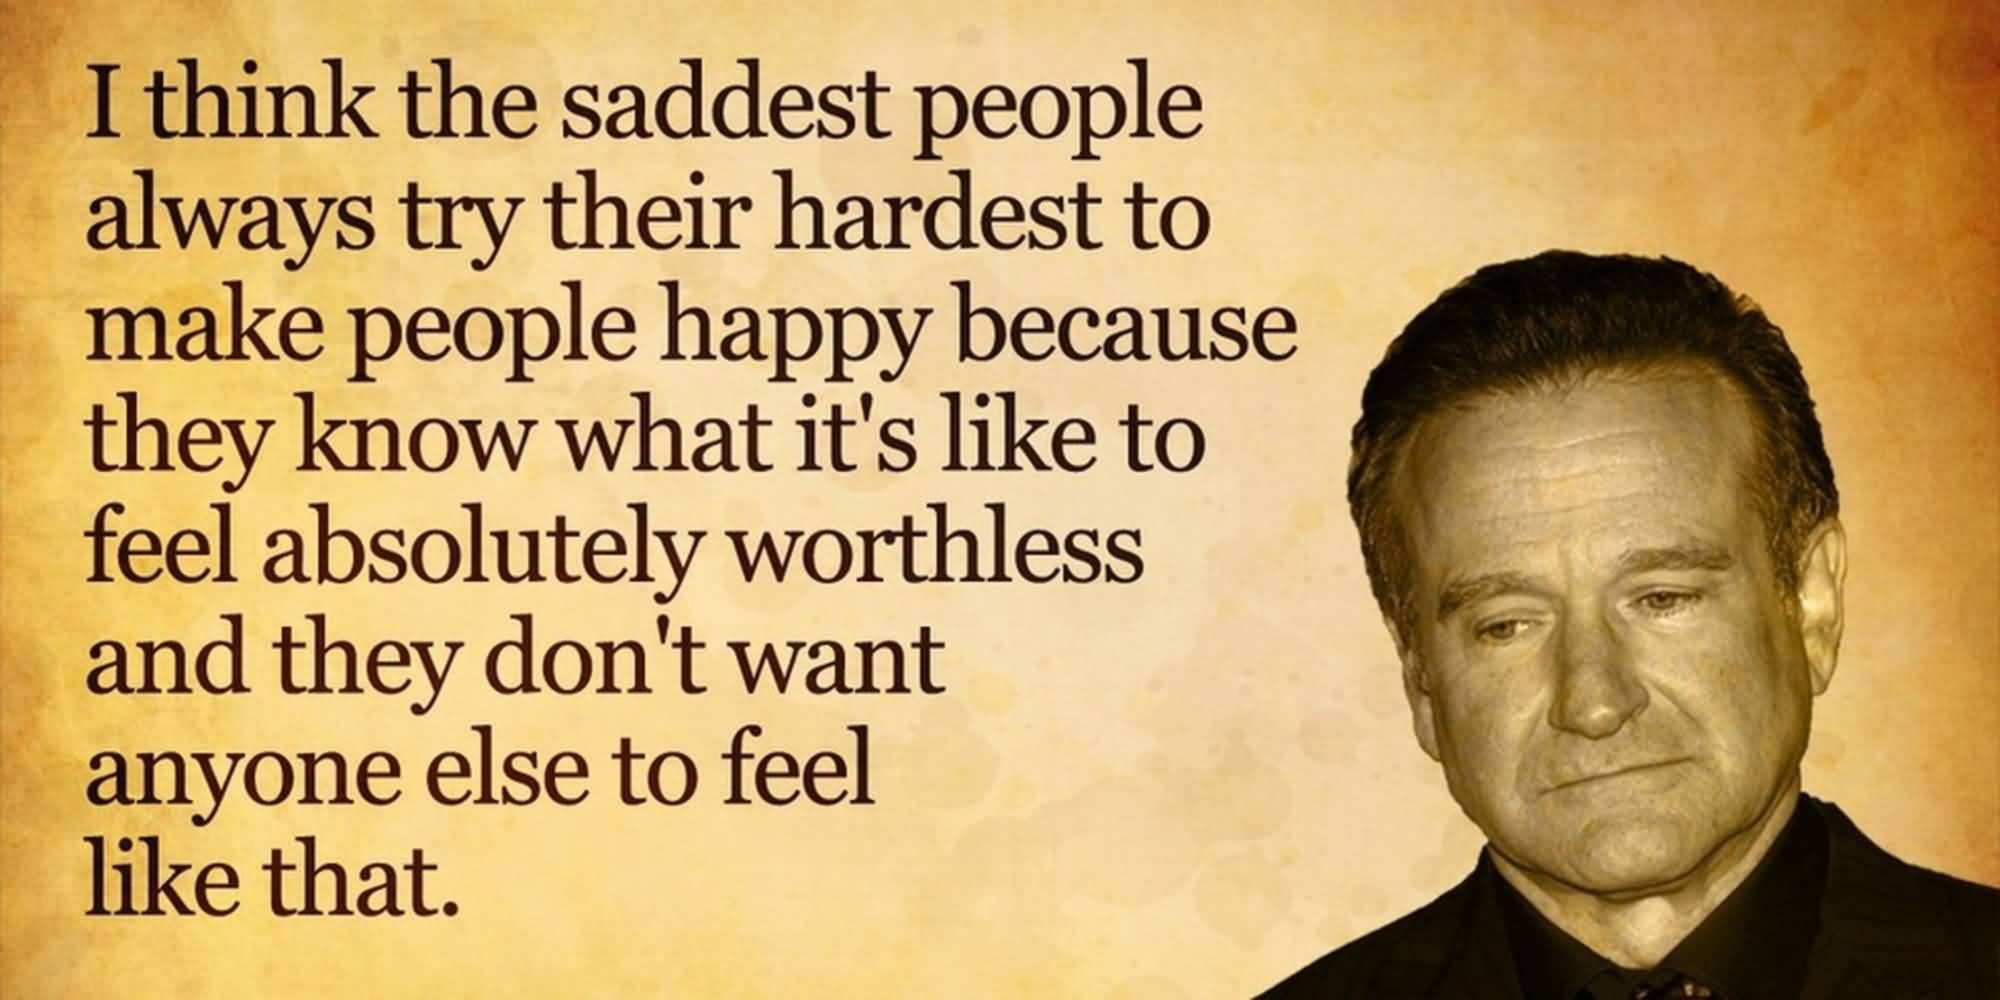 Robin Williams Quotes About Life Meme Image 17 | QuotesBae